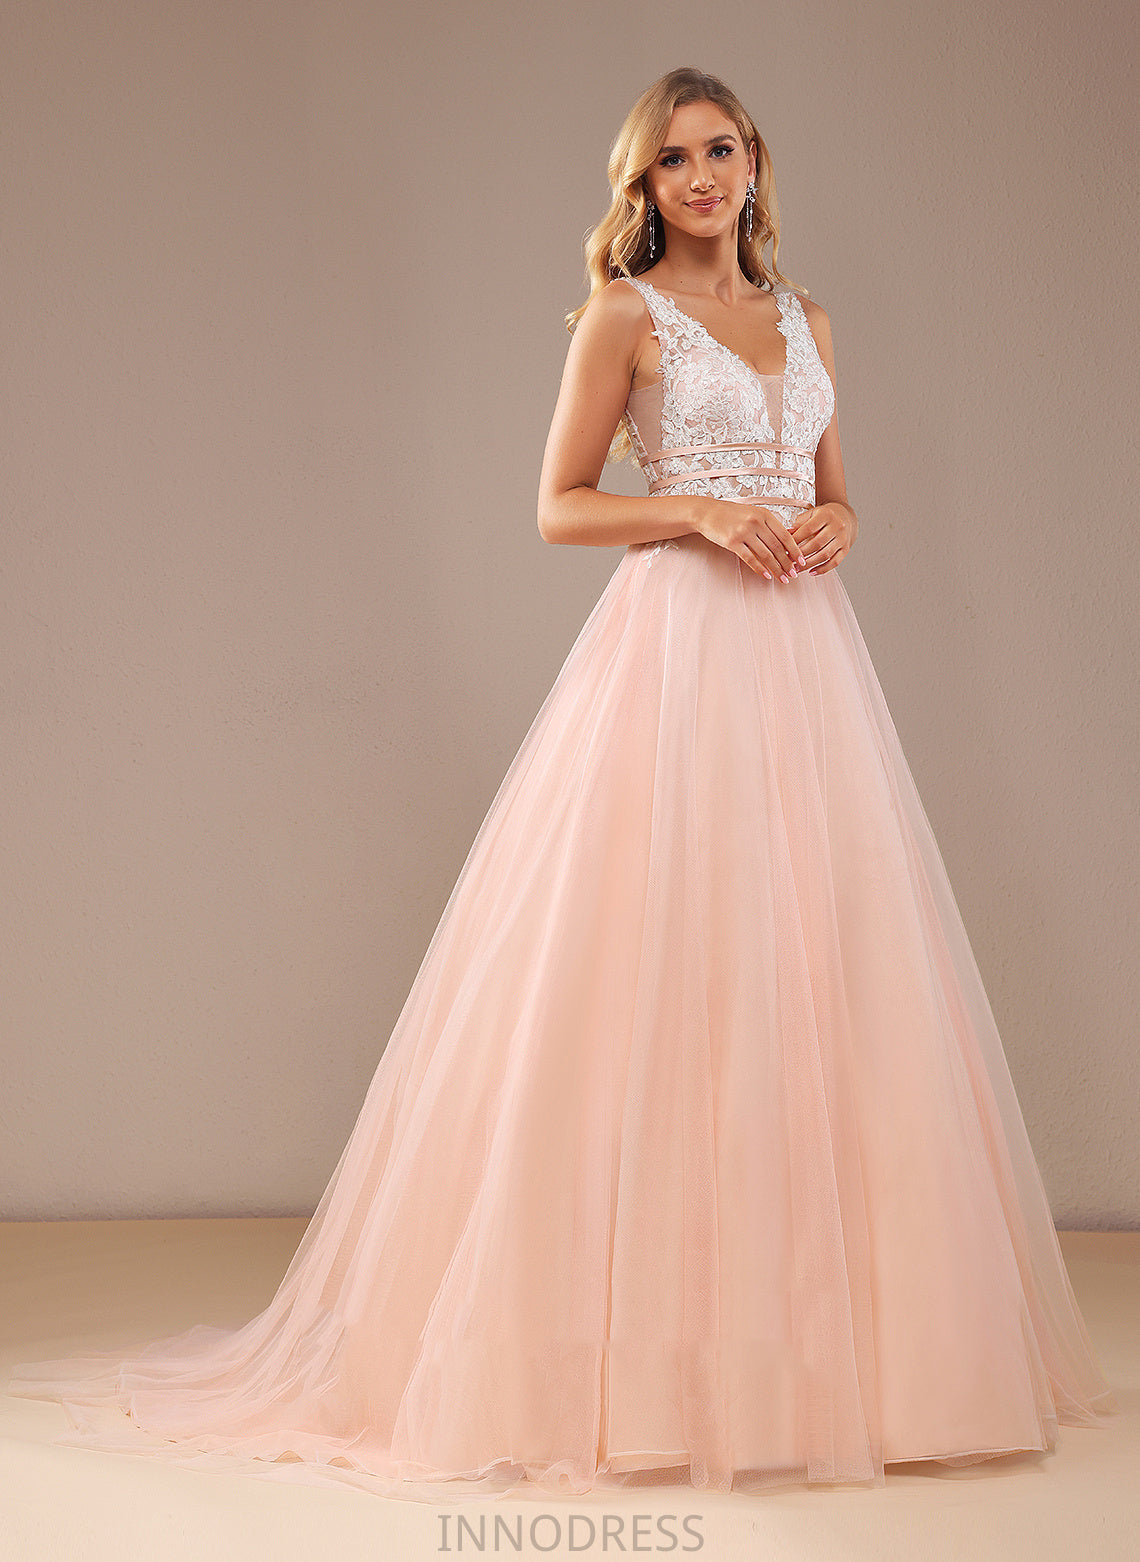 Dress Wedding V-neck Lace Court Wedding Dresses Train Ciara Lace Sequins With Ball-Gown/Princess Tulle